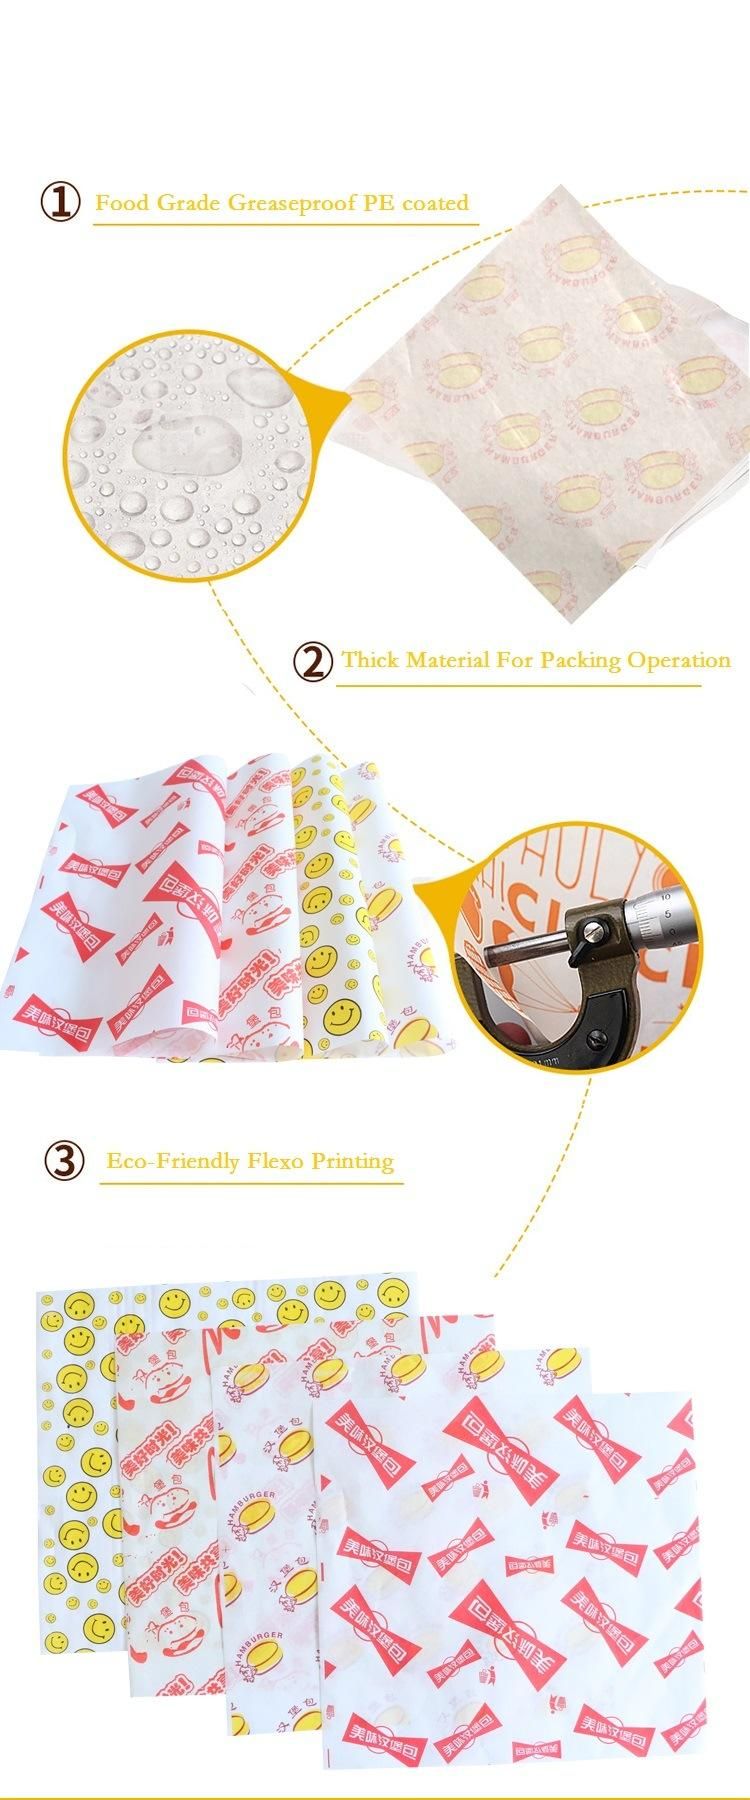 Greaseproof Food Packaging Wrapping Sandwich Burger Tray Liner Bakery Paper